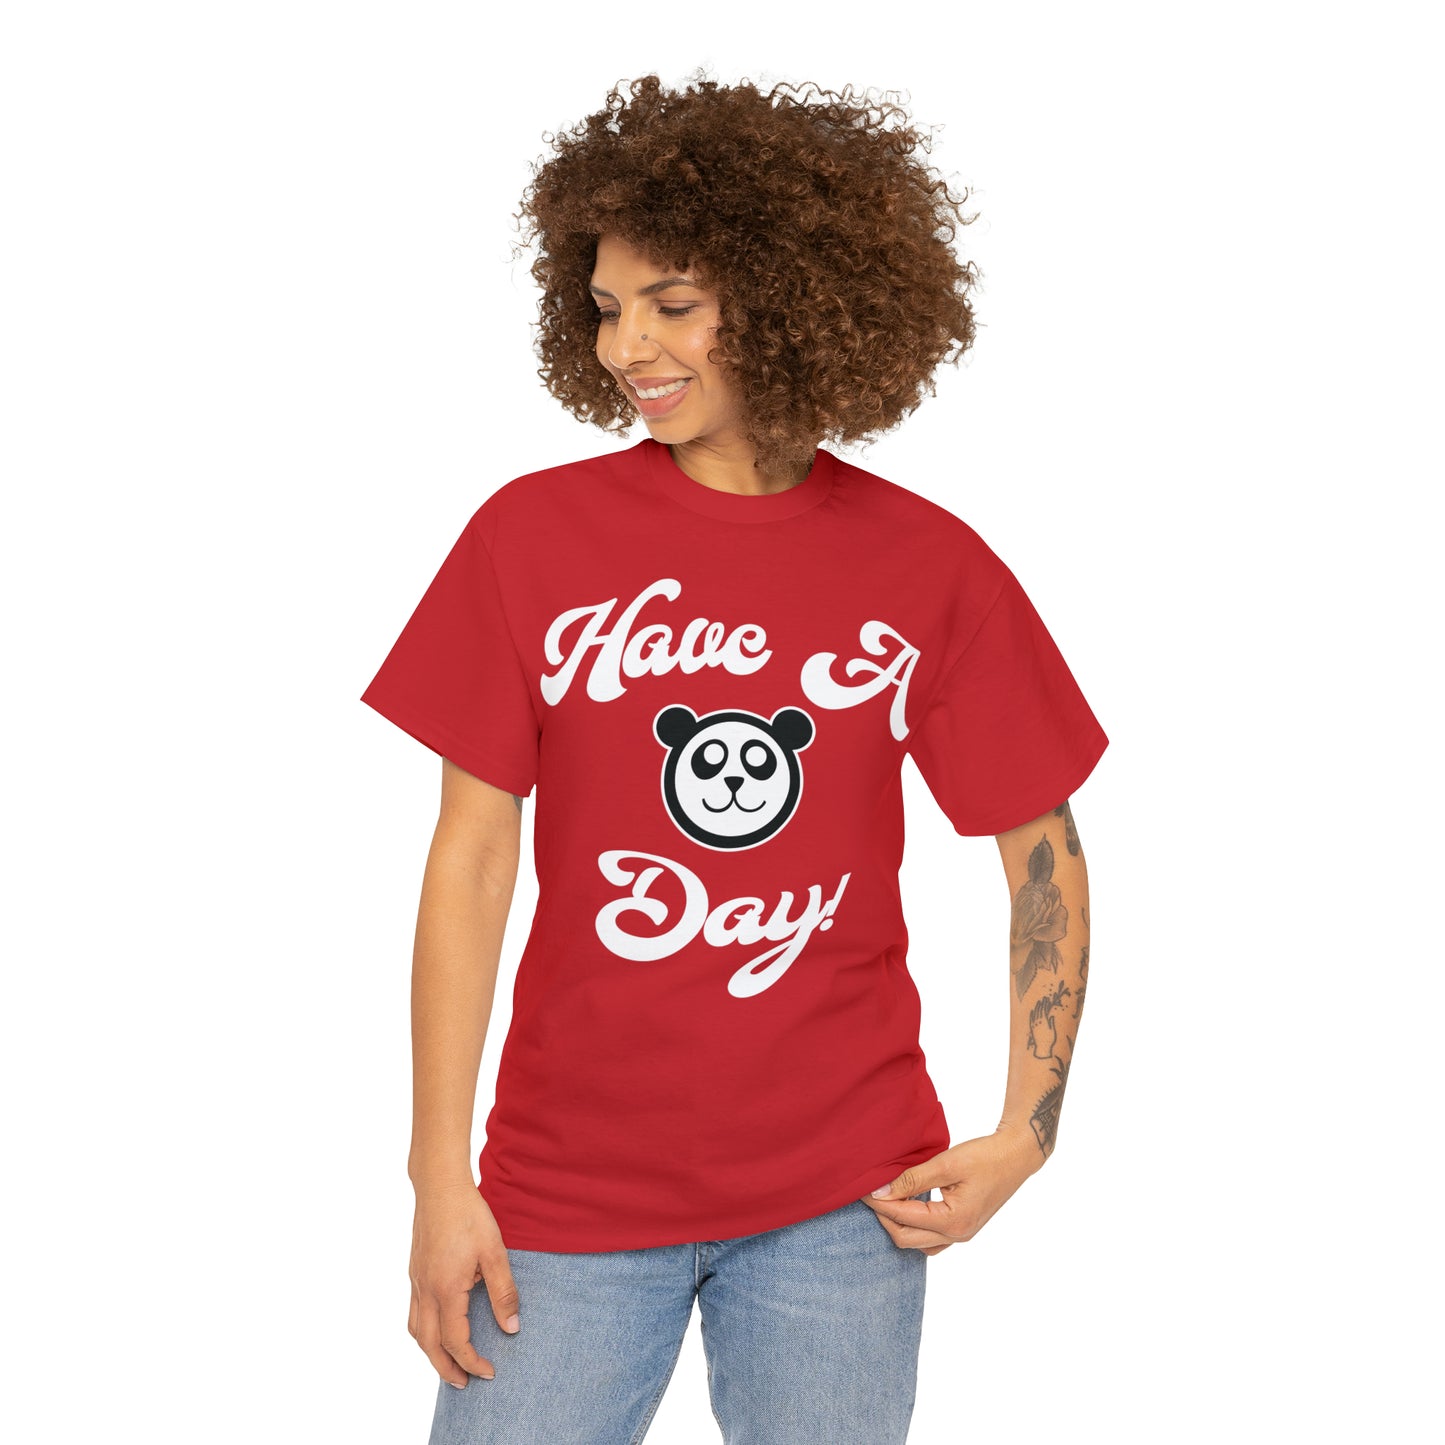 Have A Day! Tee